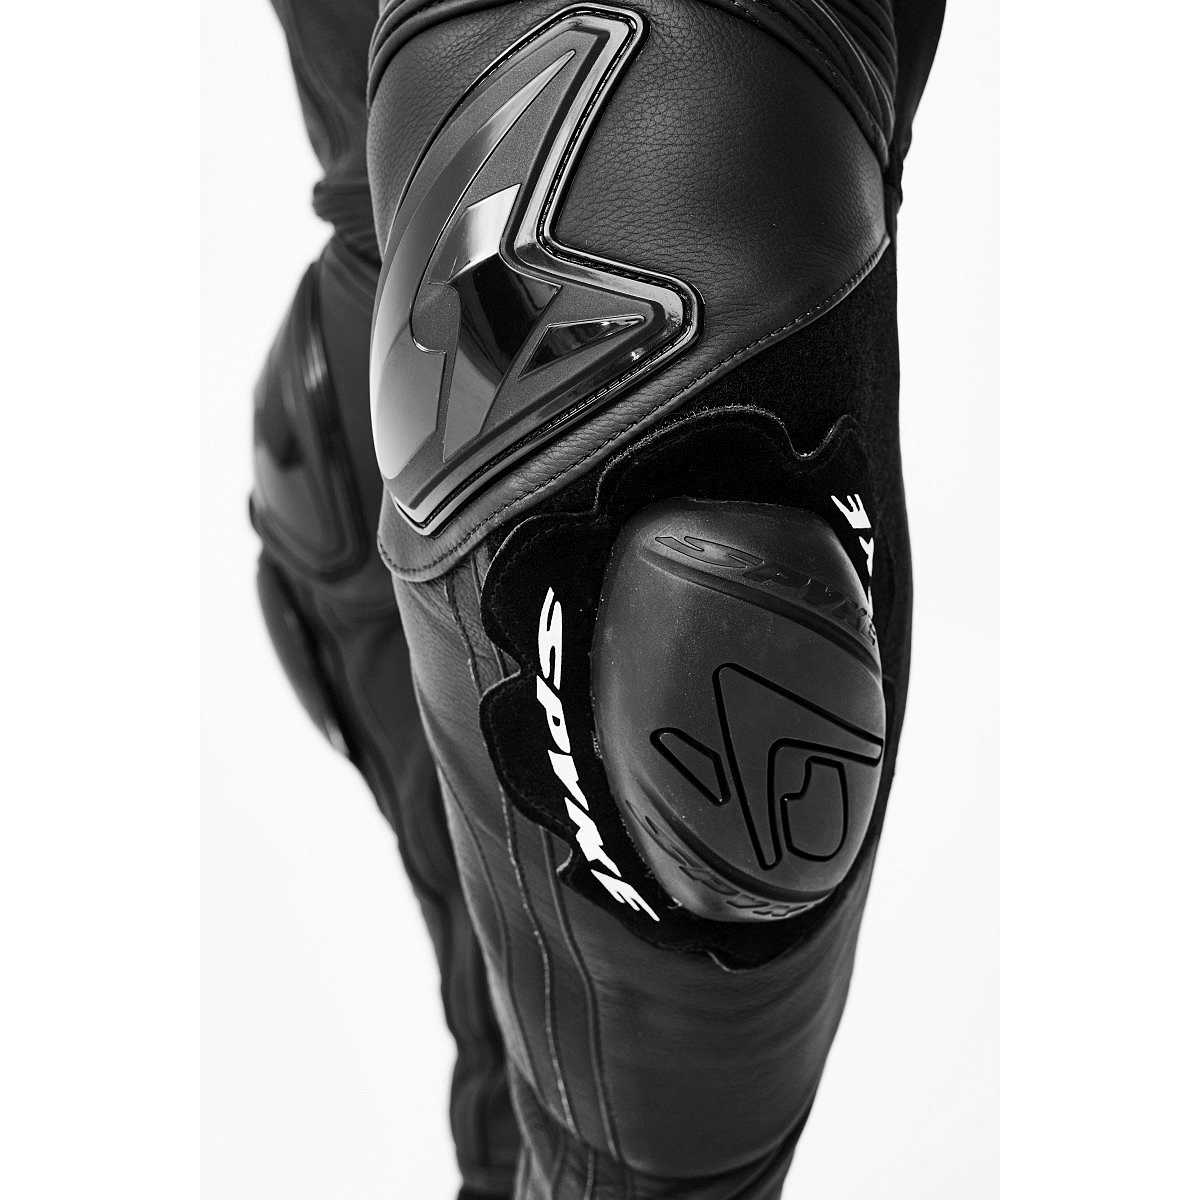 Full Leather Motorcycle Suit Spyke ARAGON RACE Black For Sale Online ...